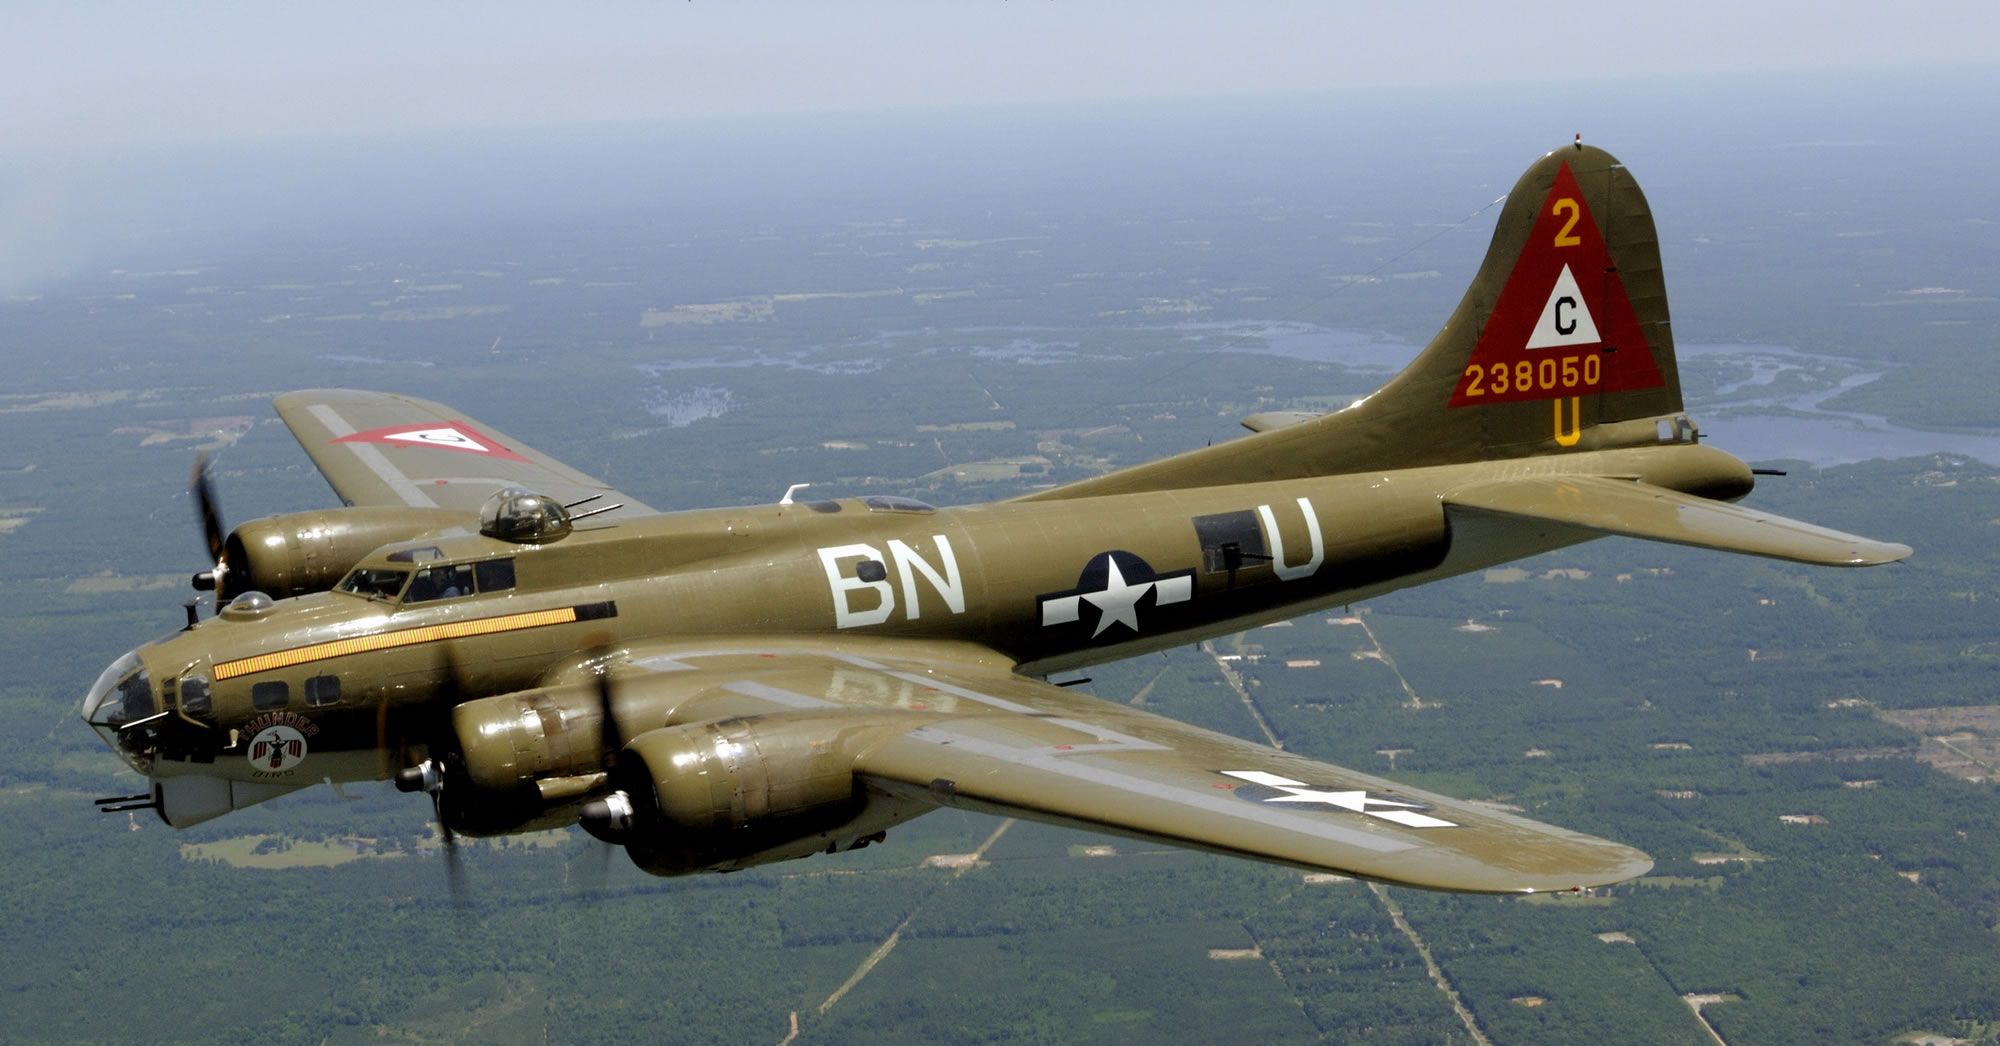 Boeing B 17 Flying Fortress Wallpaper, Military, HQ Boeing B 17 Flying Fortress PictureK Wallpaper 2019